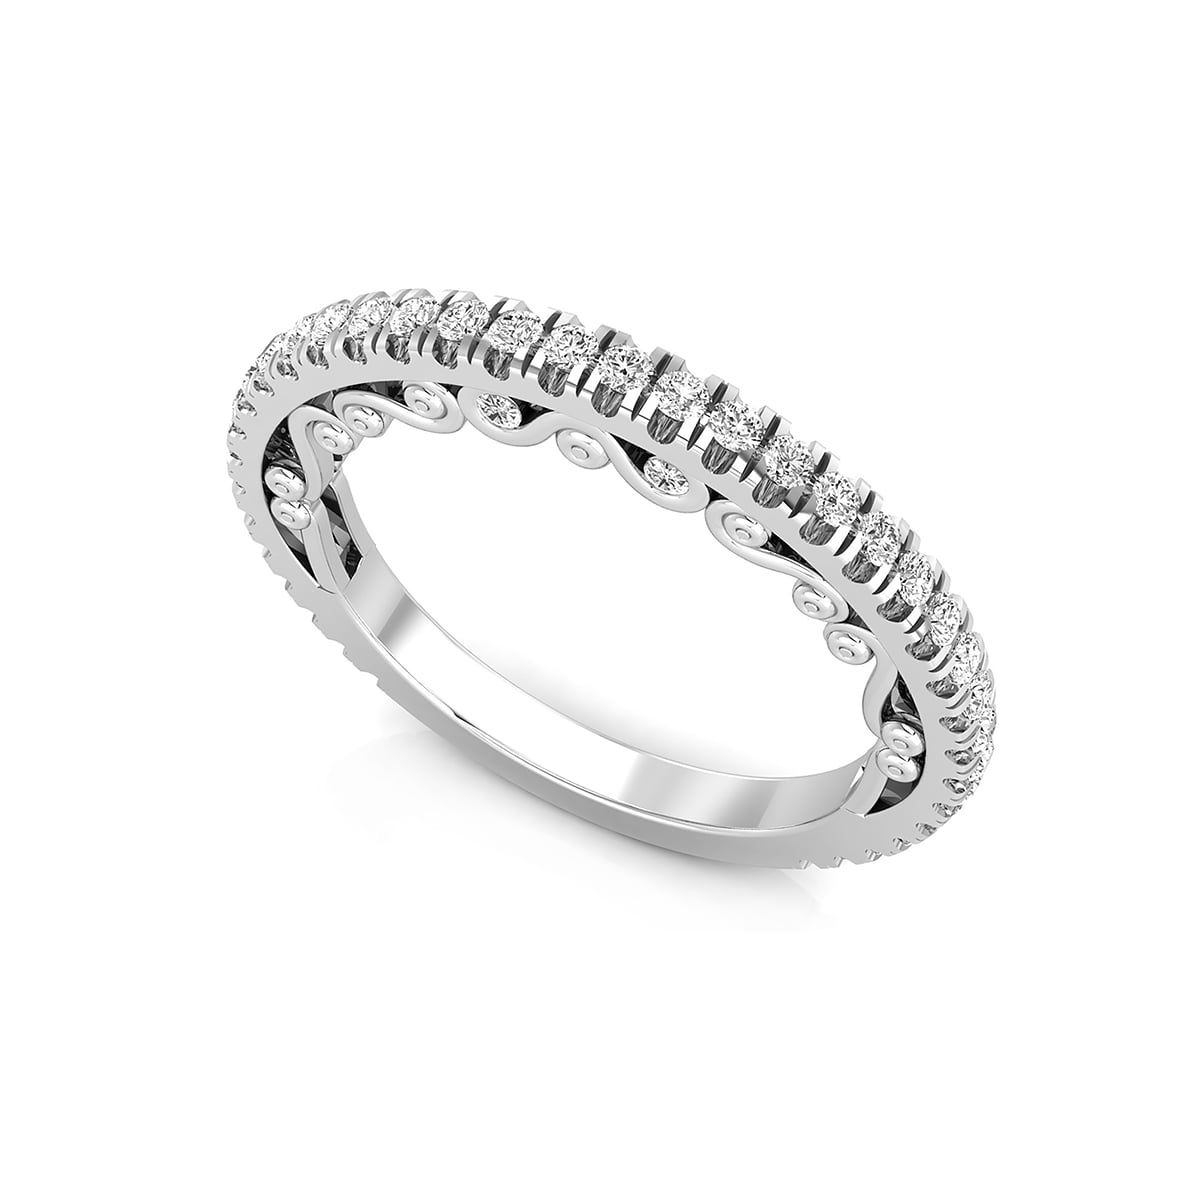 Filigree Look Round Cut Moissanite Pave Set Half Eternity Band Ring For Women ( 5/9 TCW )